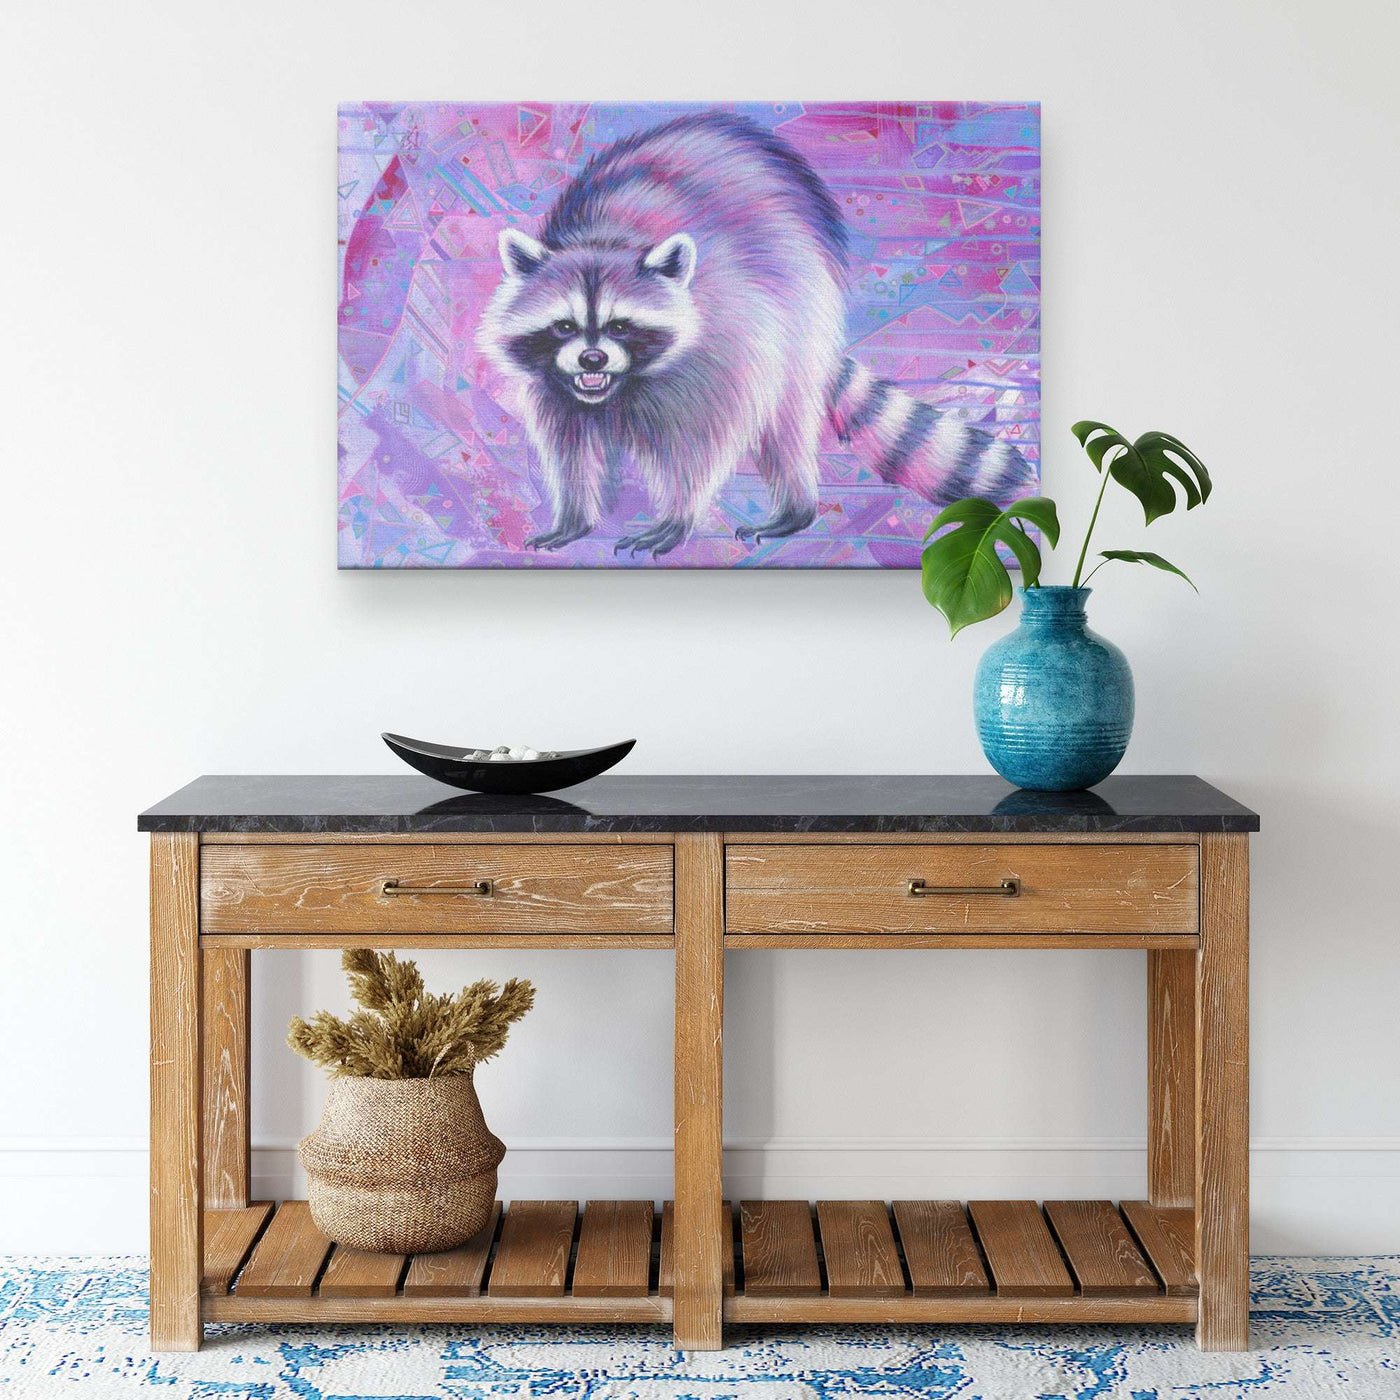 Canvas Raccoon Print of a pink and purple raccoon on a wall above a wooden table.